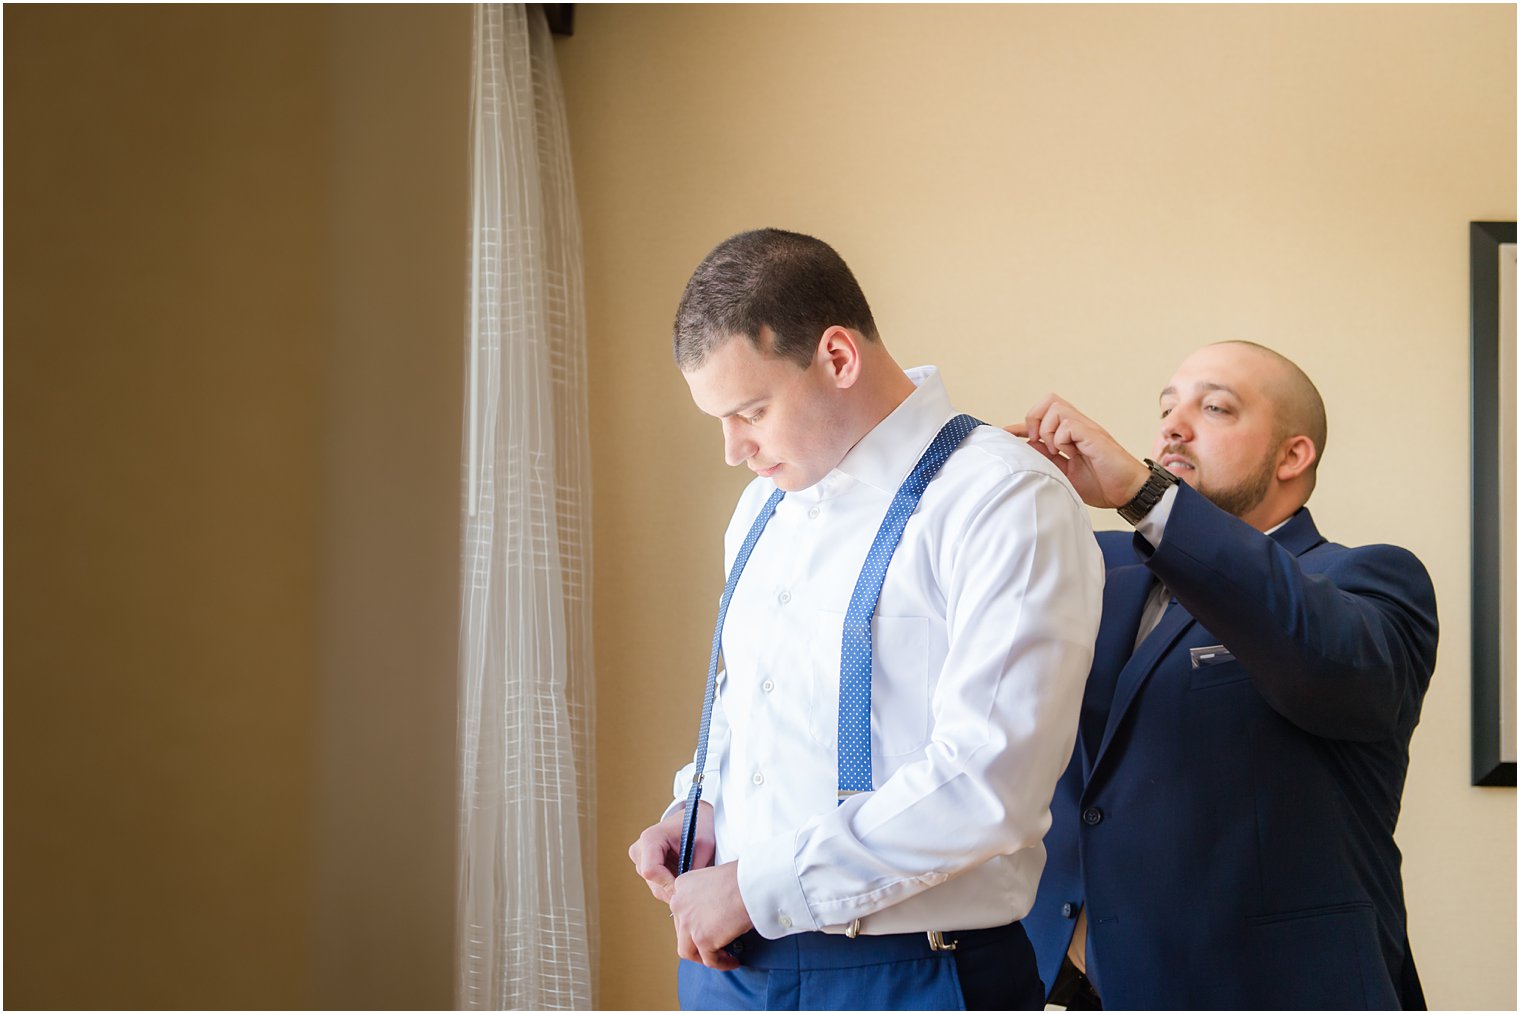 Groom getting ready with best man for wedding at Windows on the Water at Frogbridge in Millstone NJ